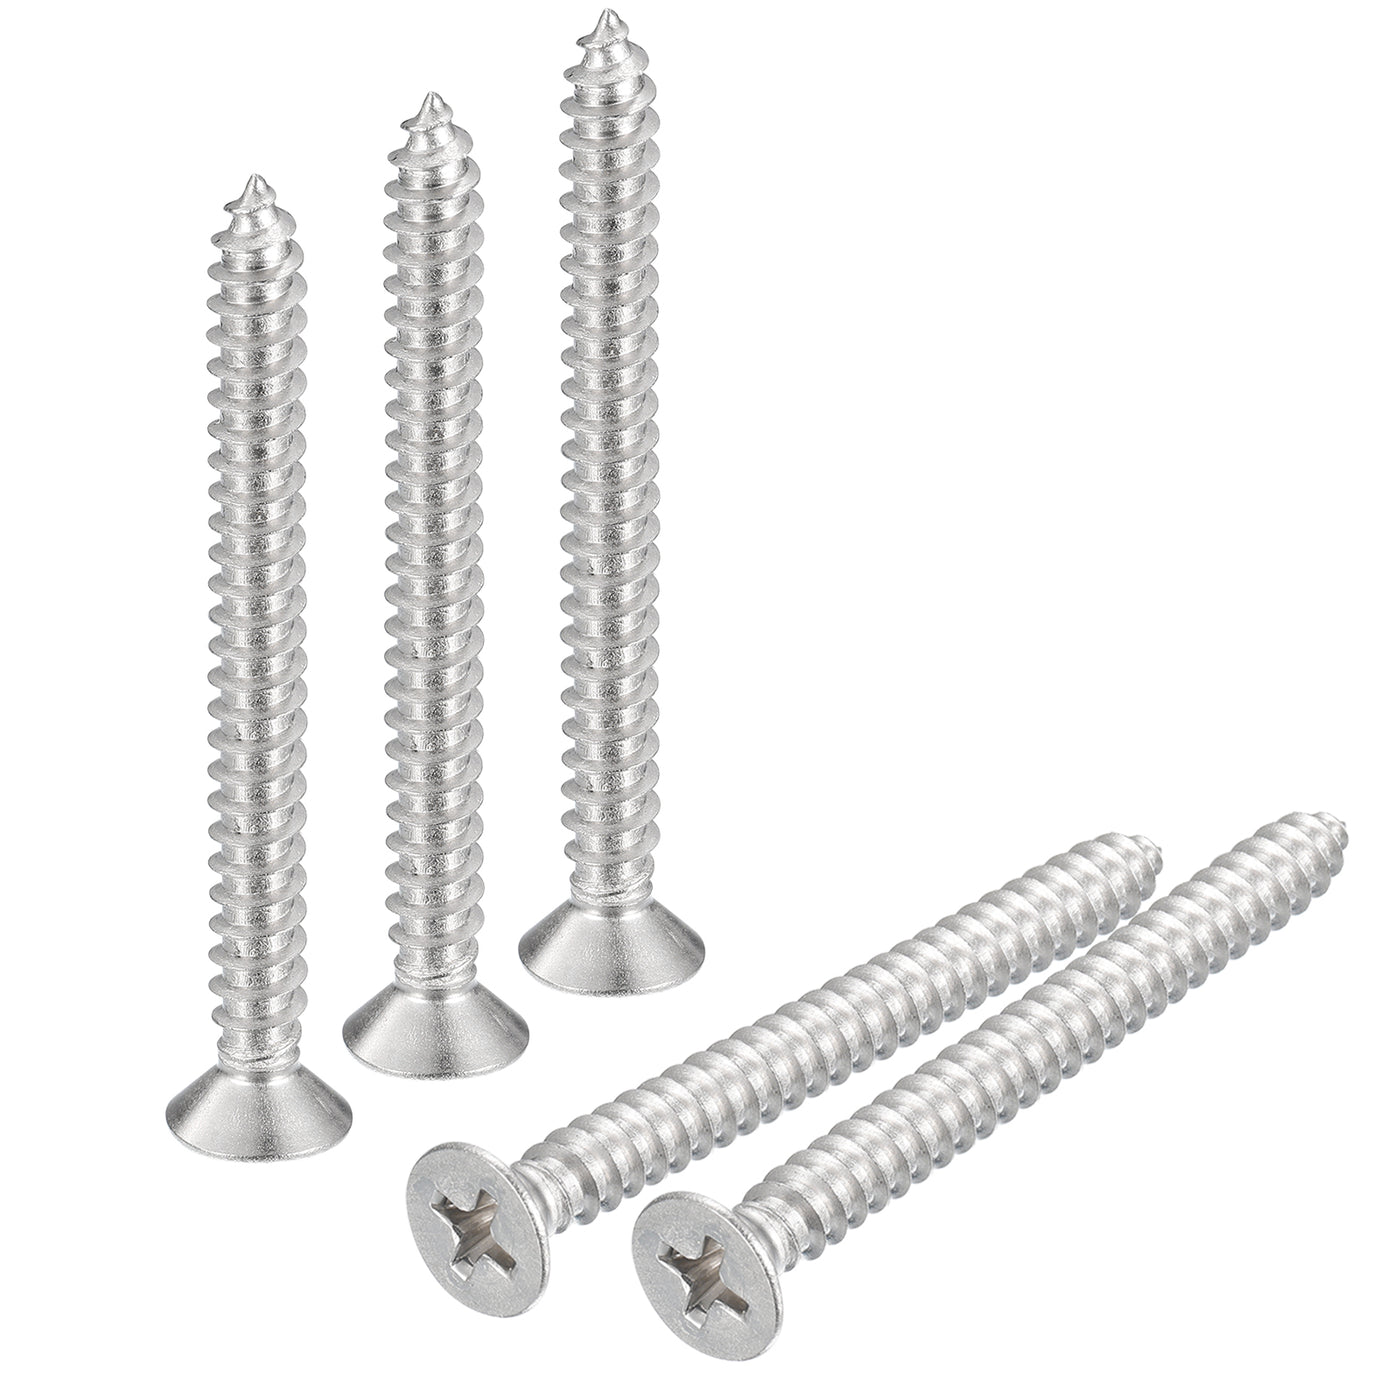 uxcell Uxcell #10x2" Wood Screws, 25pcs Phillips Self Tapping Screws 304 Stainless Steel